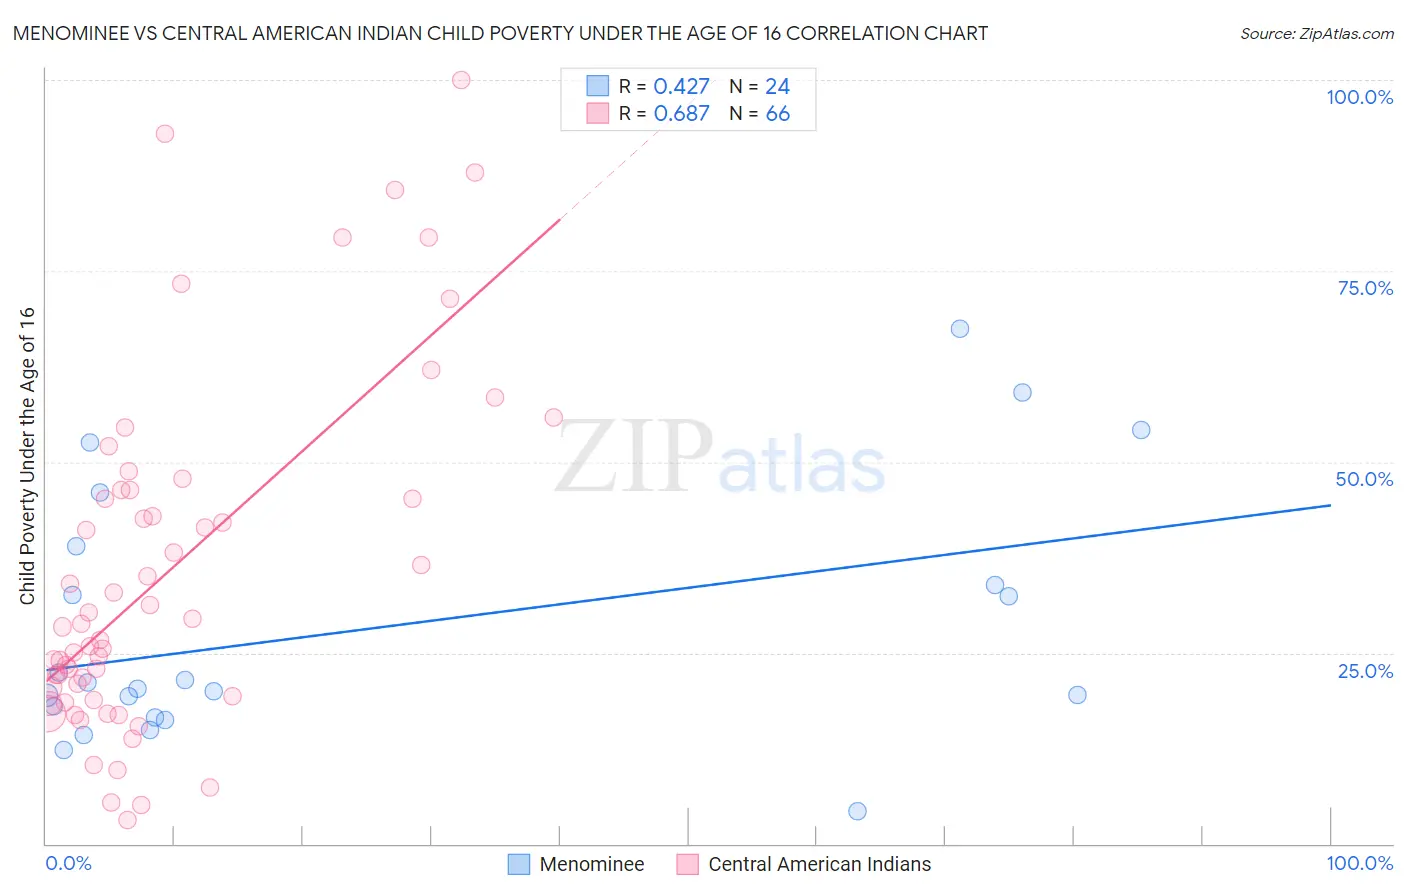 Menominee vs Central American Indian Child Poverty Under the Age of 16